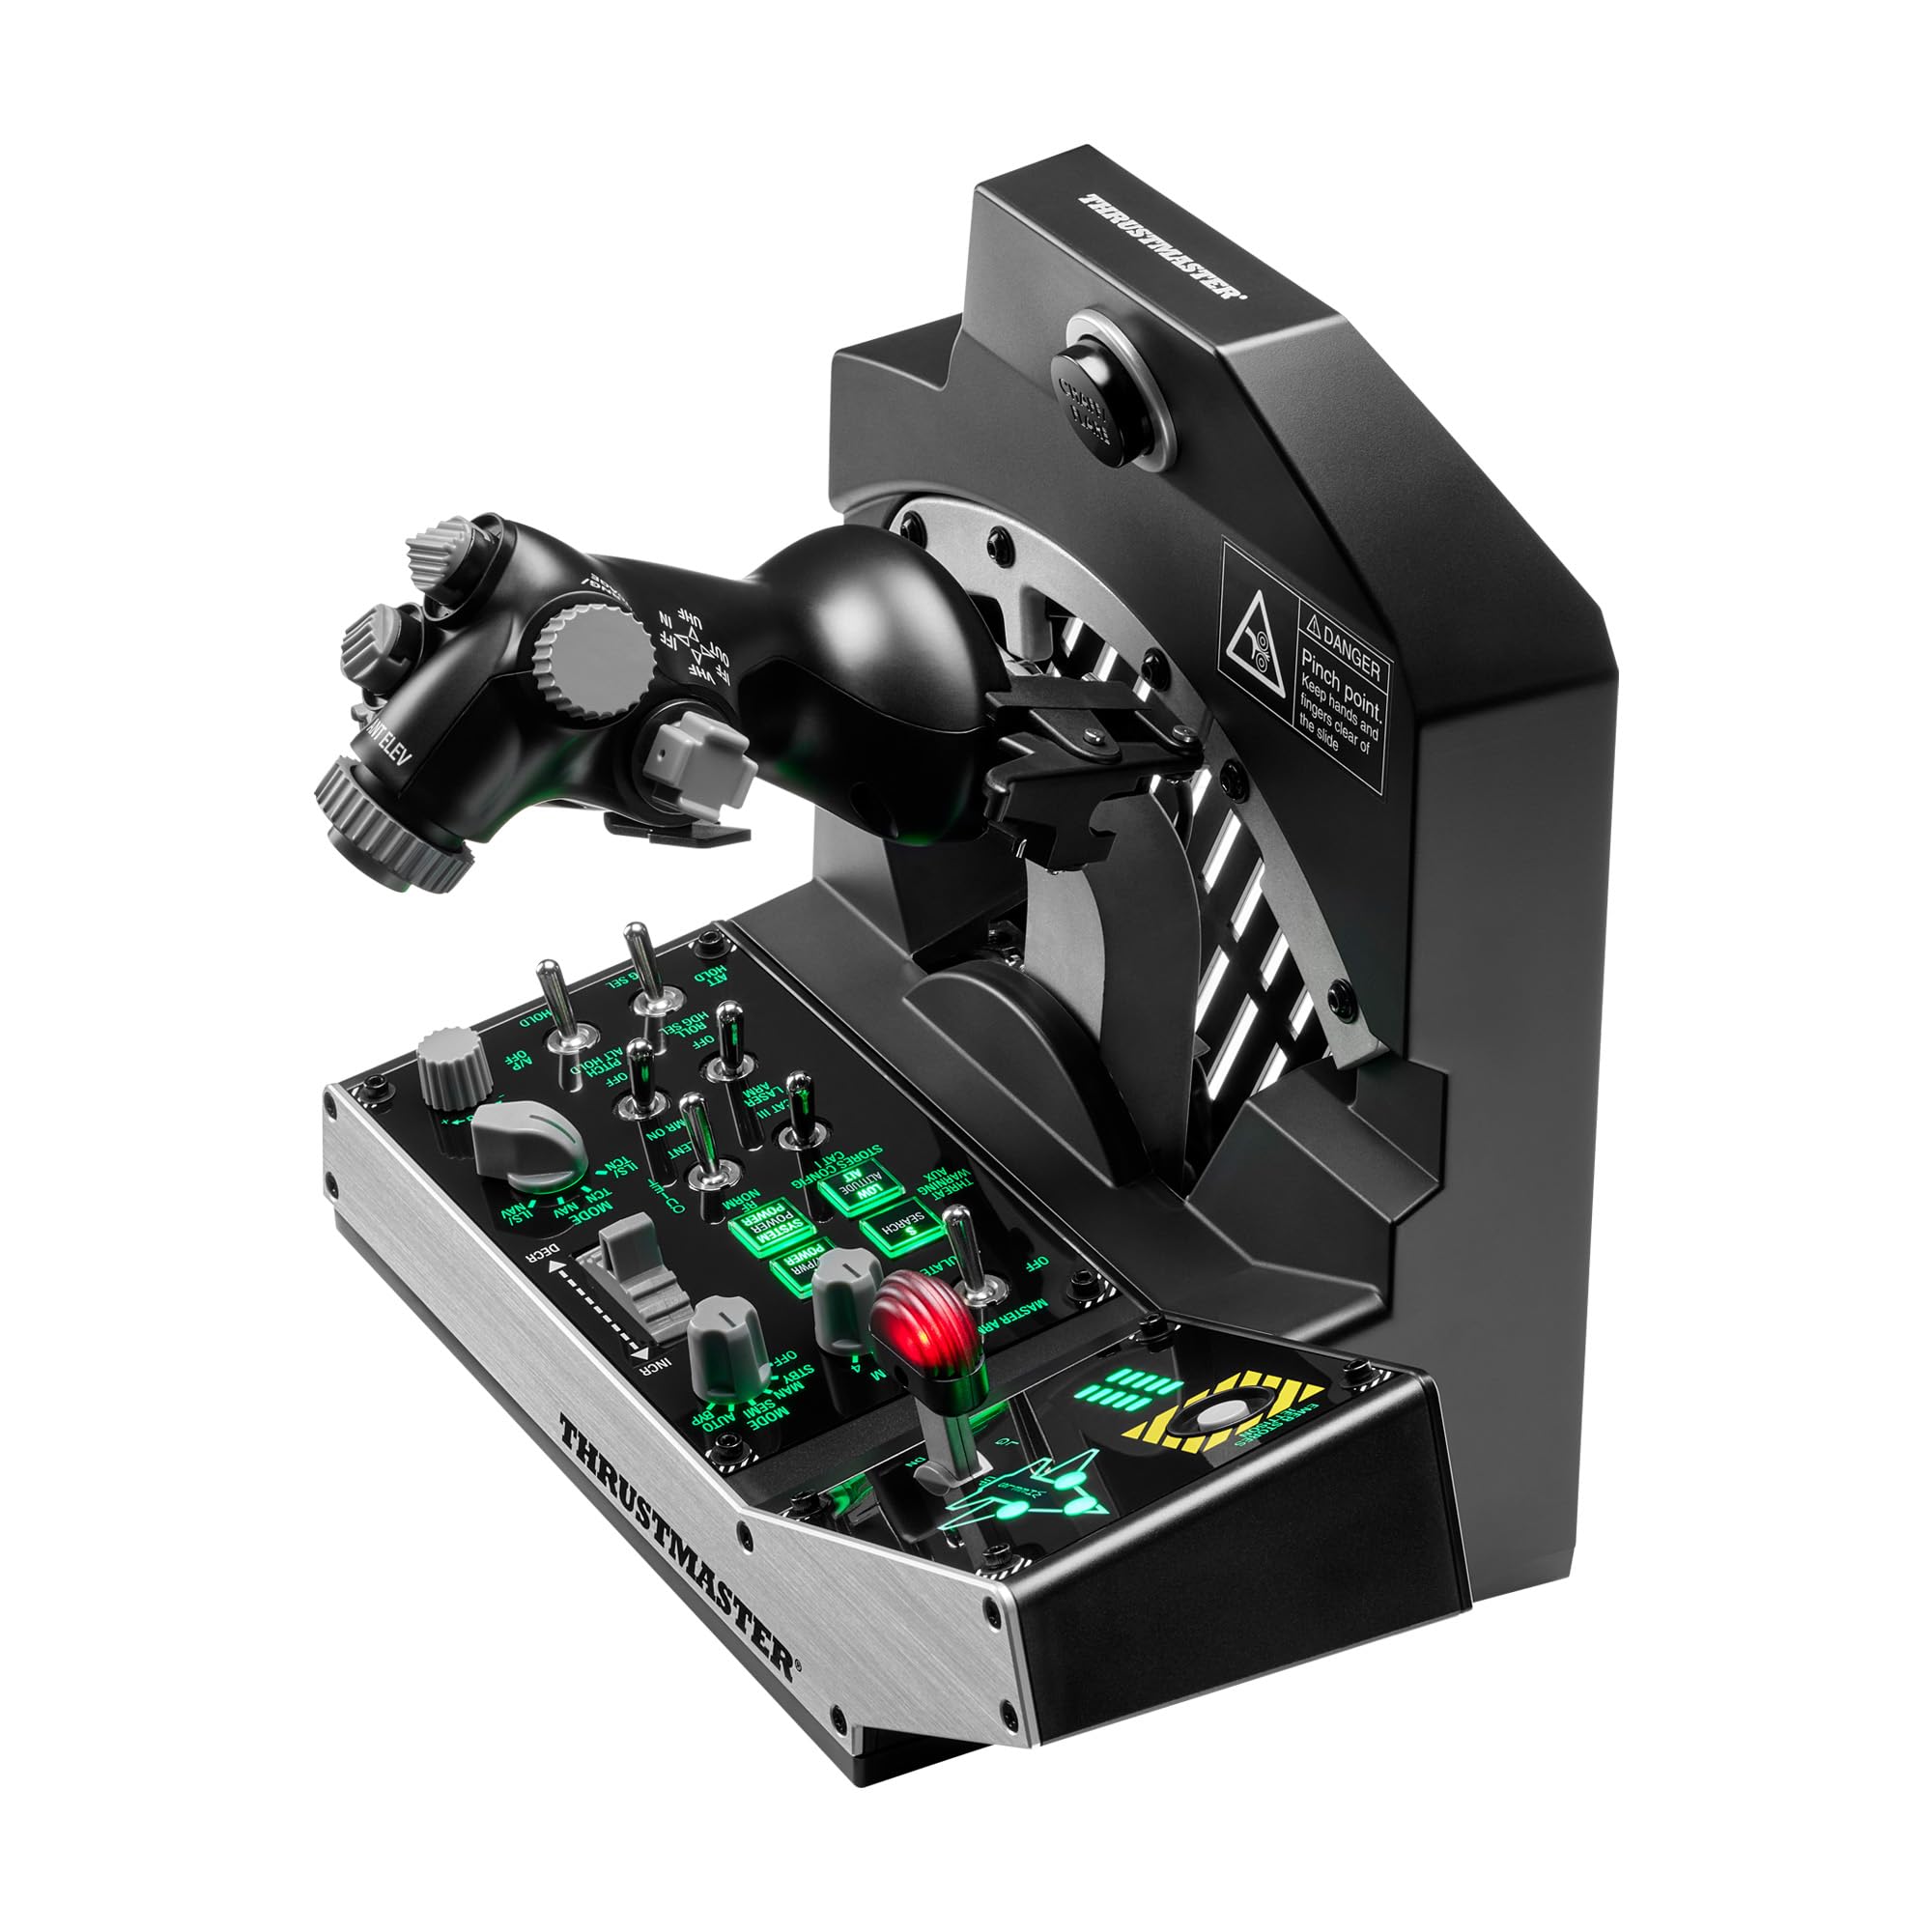 Thrustmaster Viper TQS Mission Pack: Metal Throttle Quadrant System, Throttle and Control Panel Included, 64 Action Buttons, 6 Axes, Licensed by the U.S. Air Force (PC)